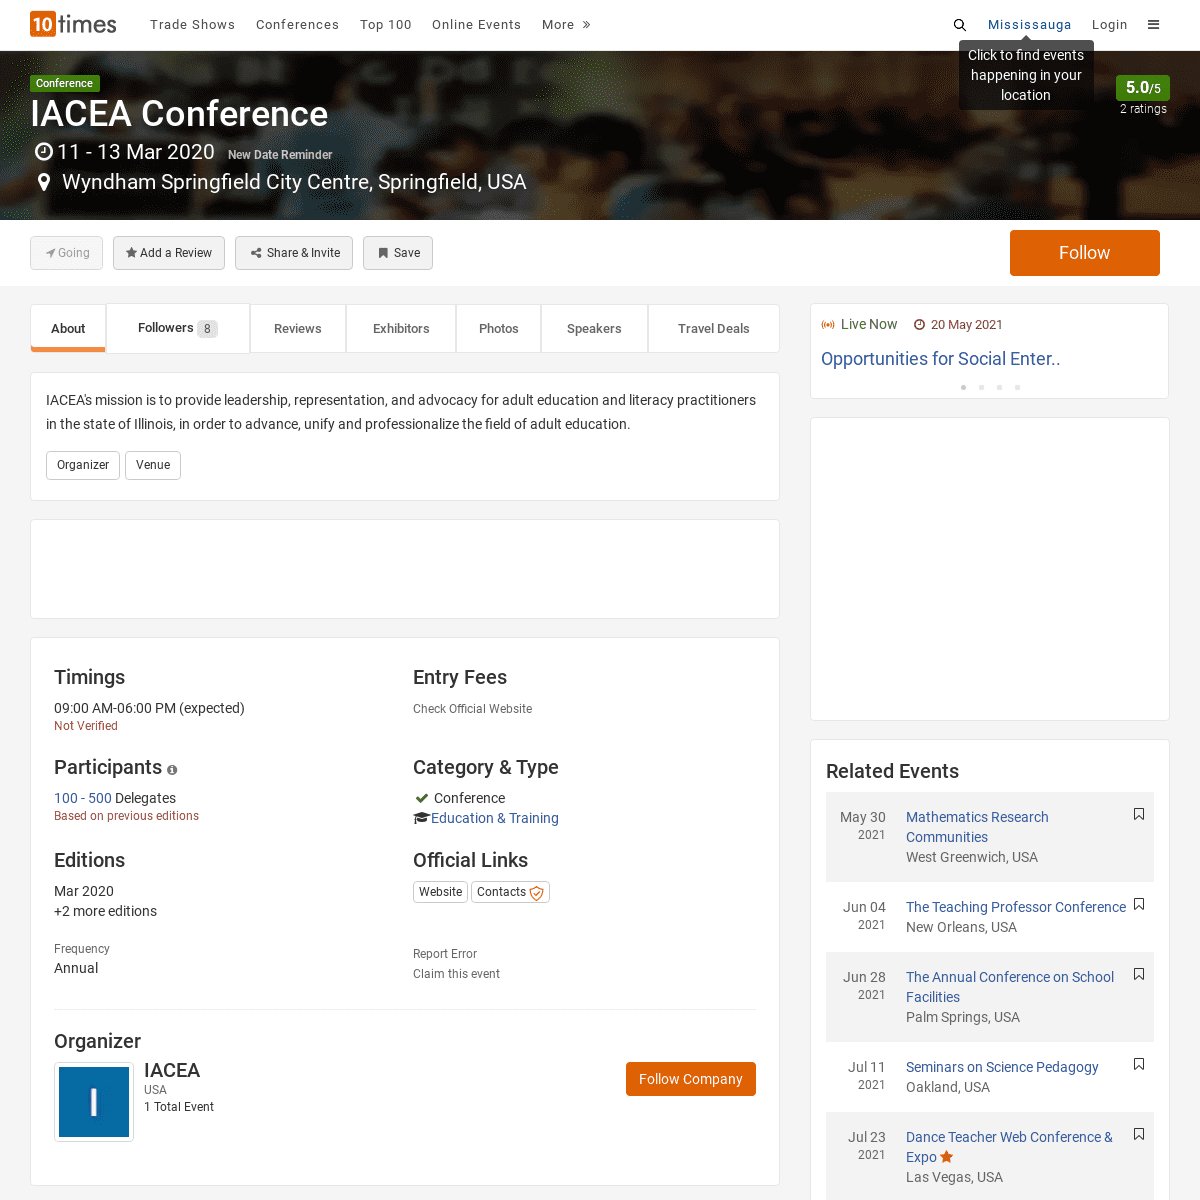 A complete backup of https://10times.com/iacea-conference